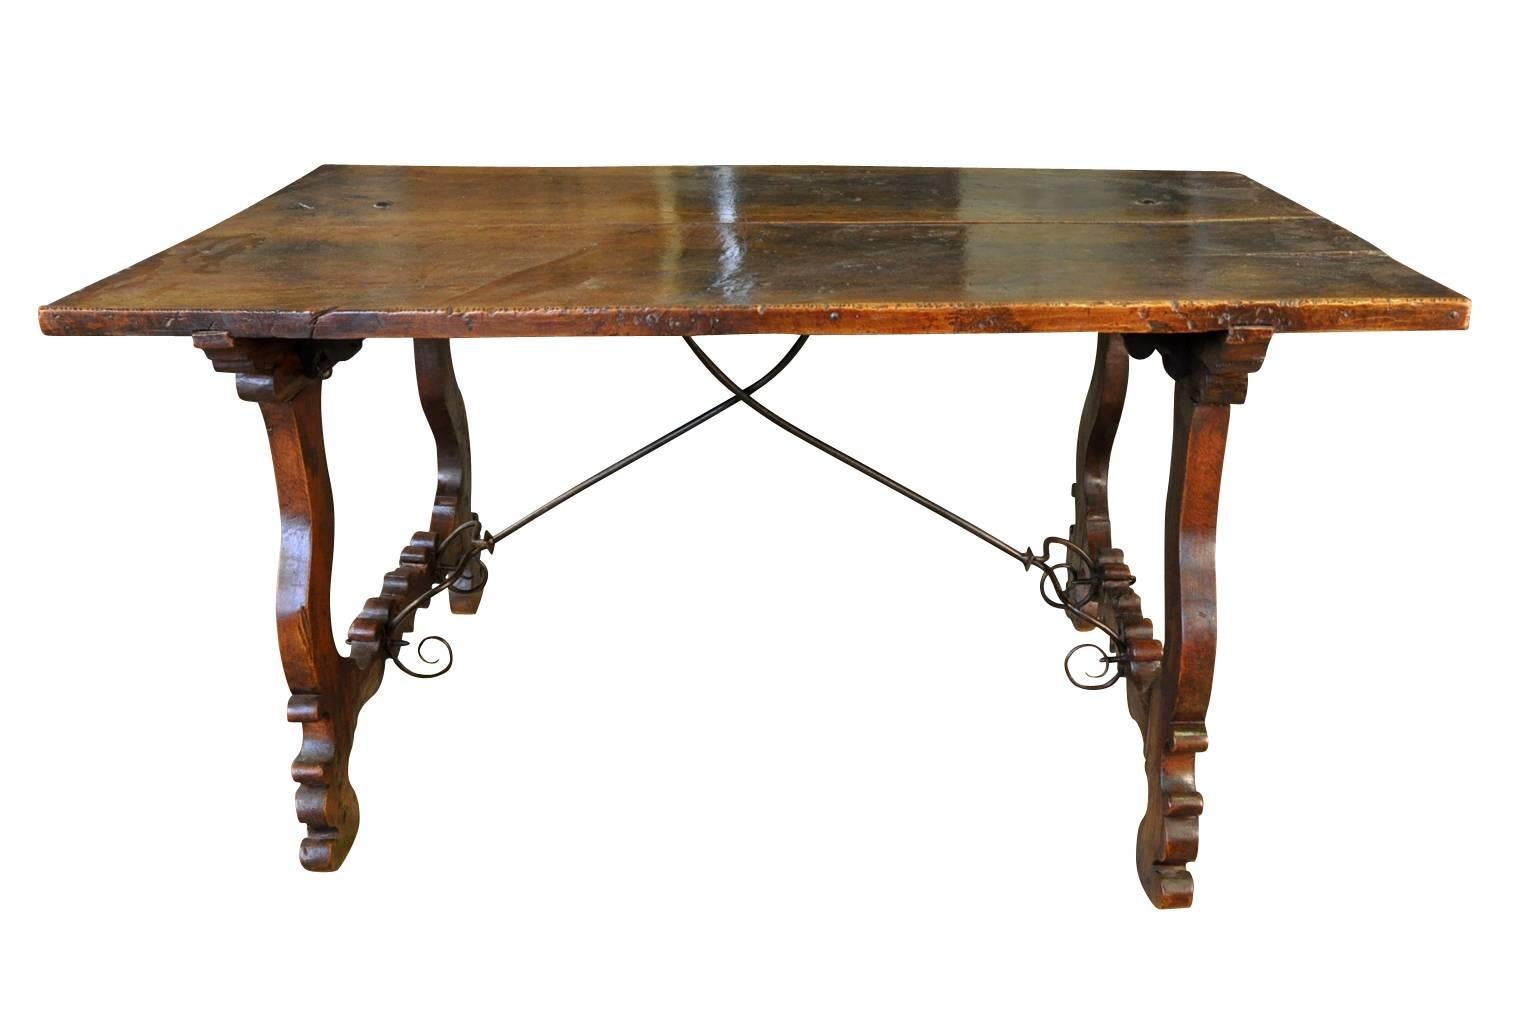 An outstanding 17th century Spanish table masterly constructed from walnut and hand-forged double pronged iron stretchers. Sensational patina - so very rich and luminous. Perfect as a smaller dining table or writing table.